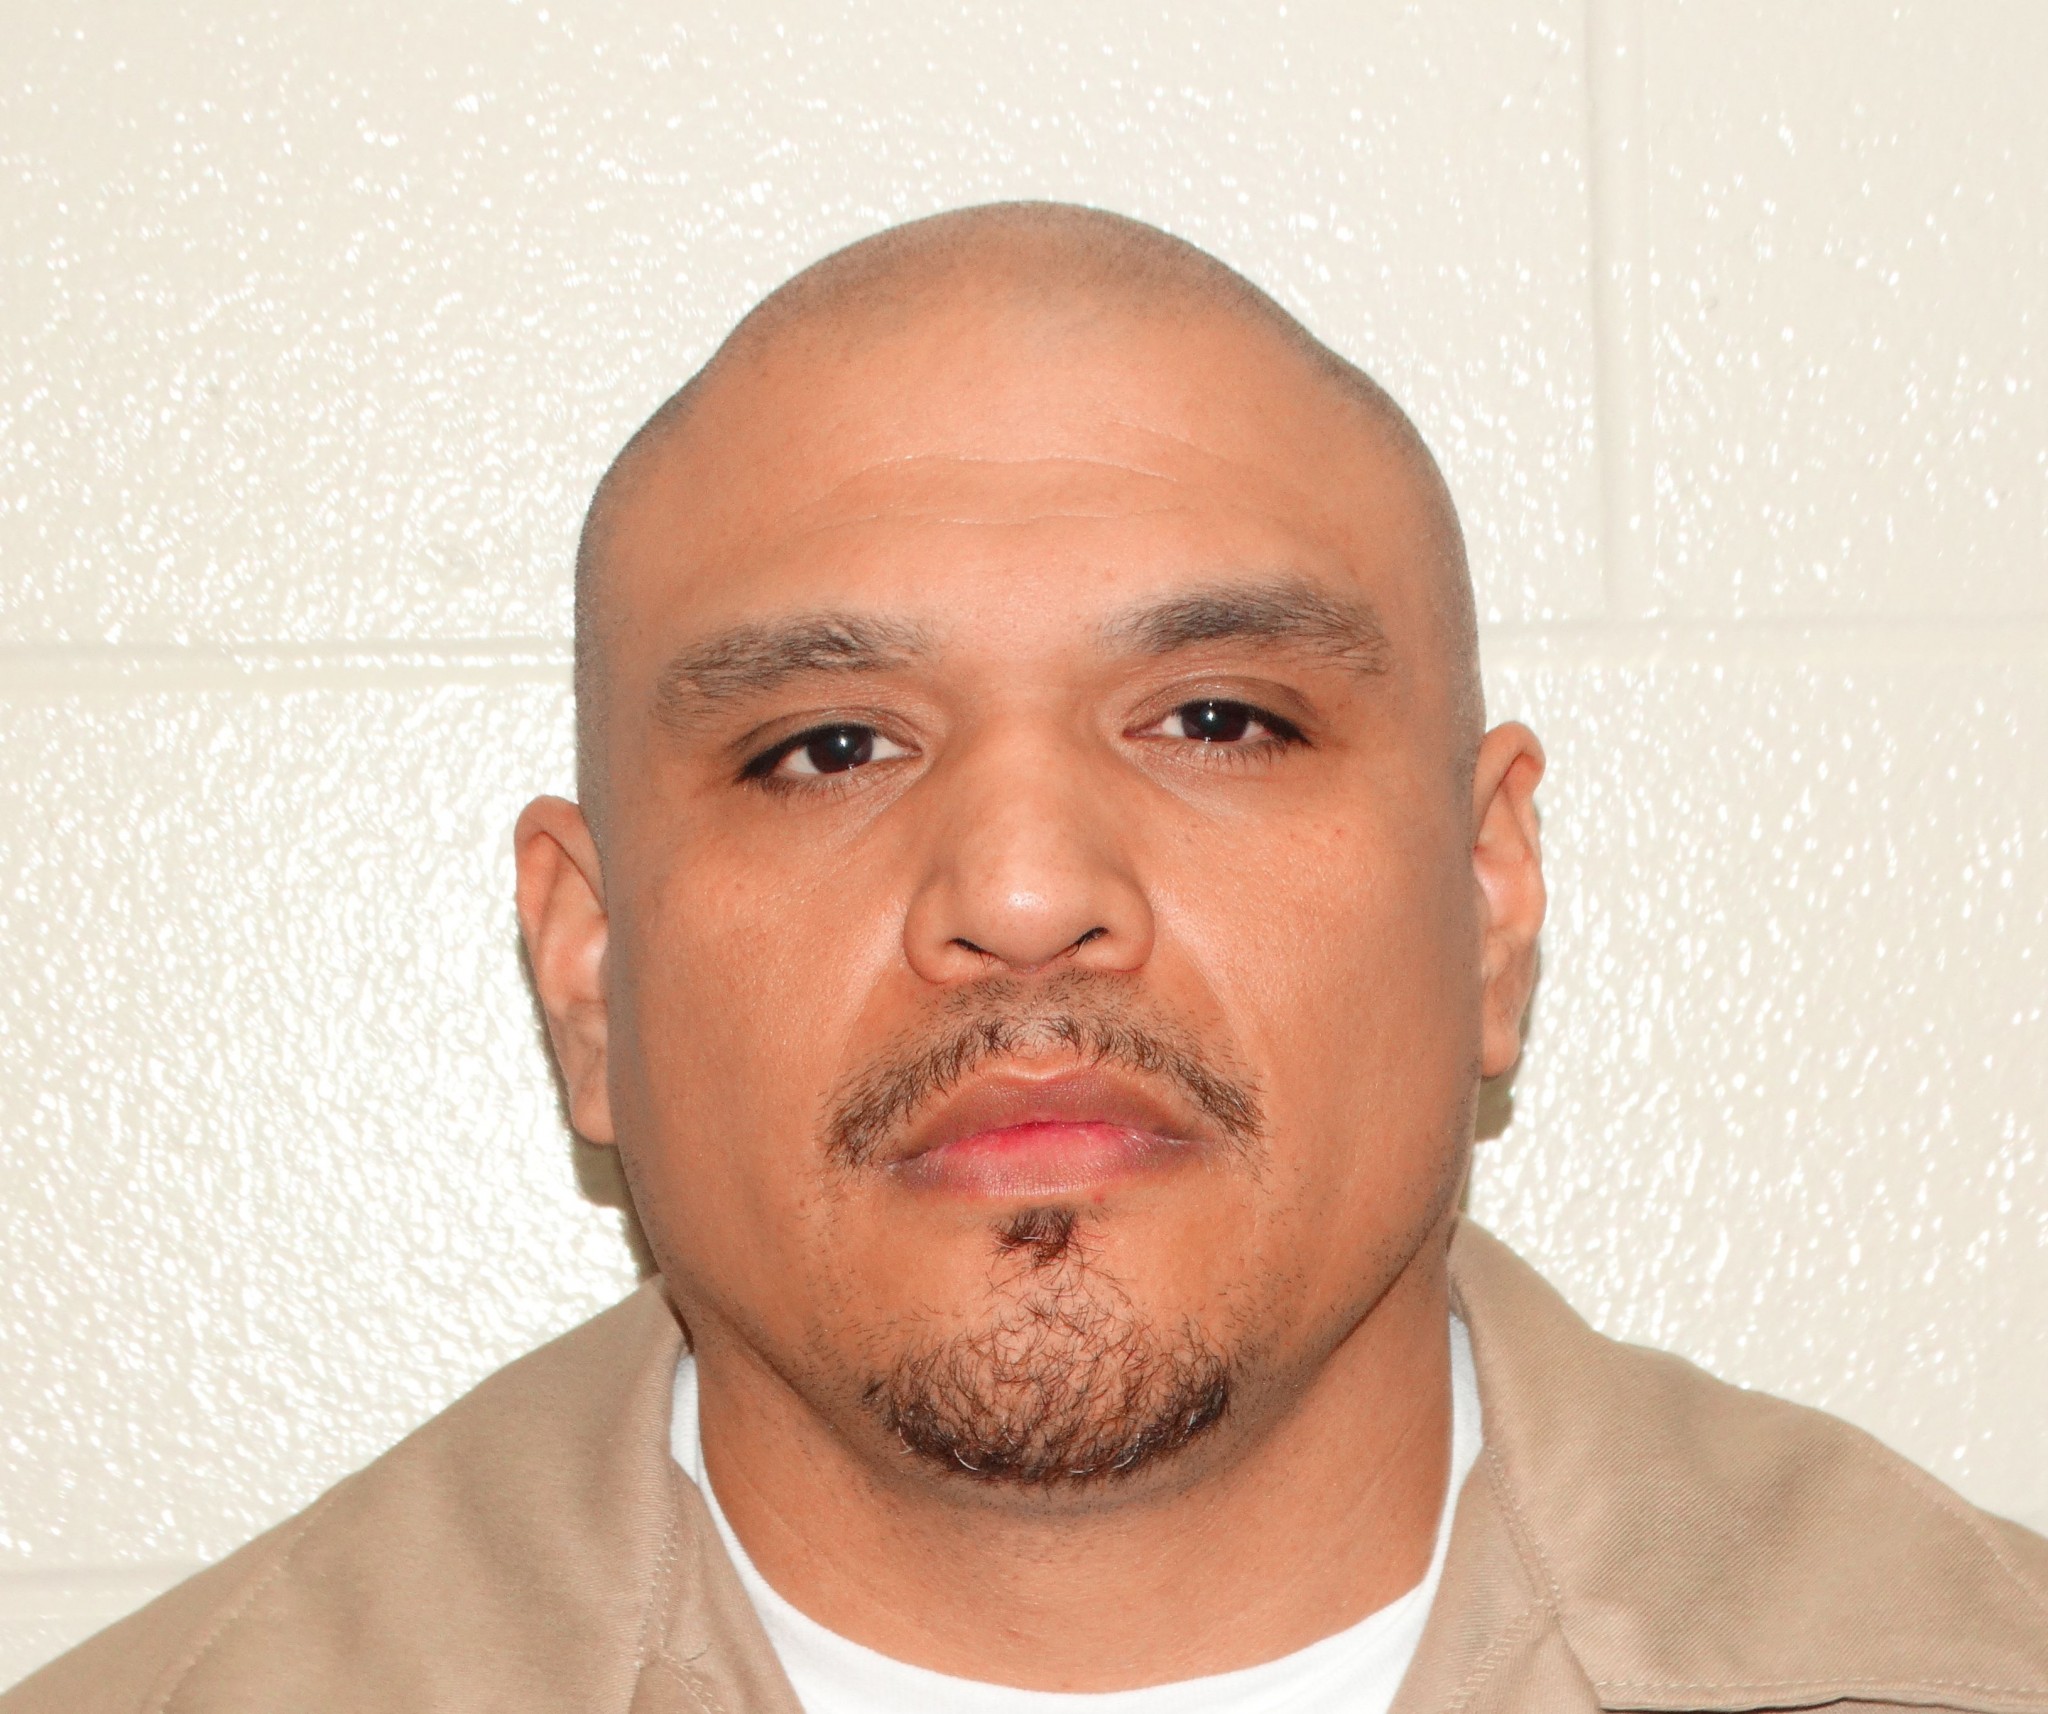 Inmate missing from CCCL